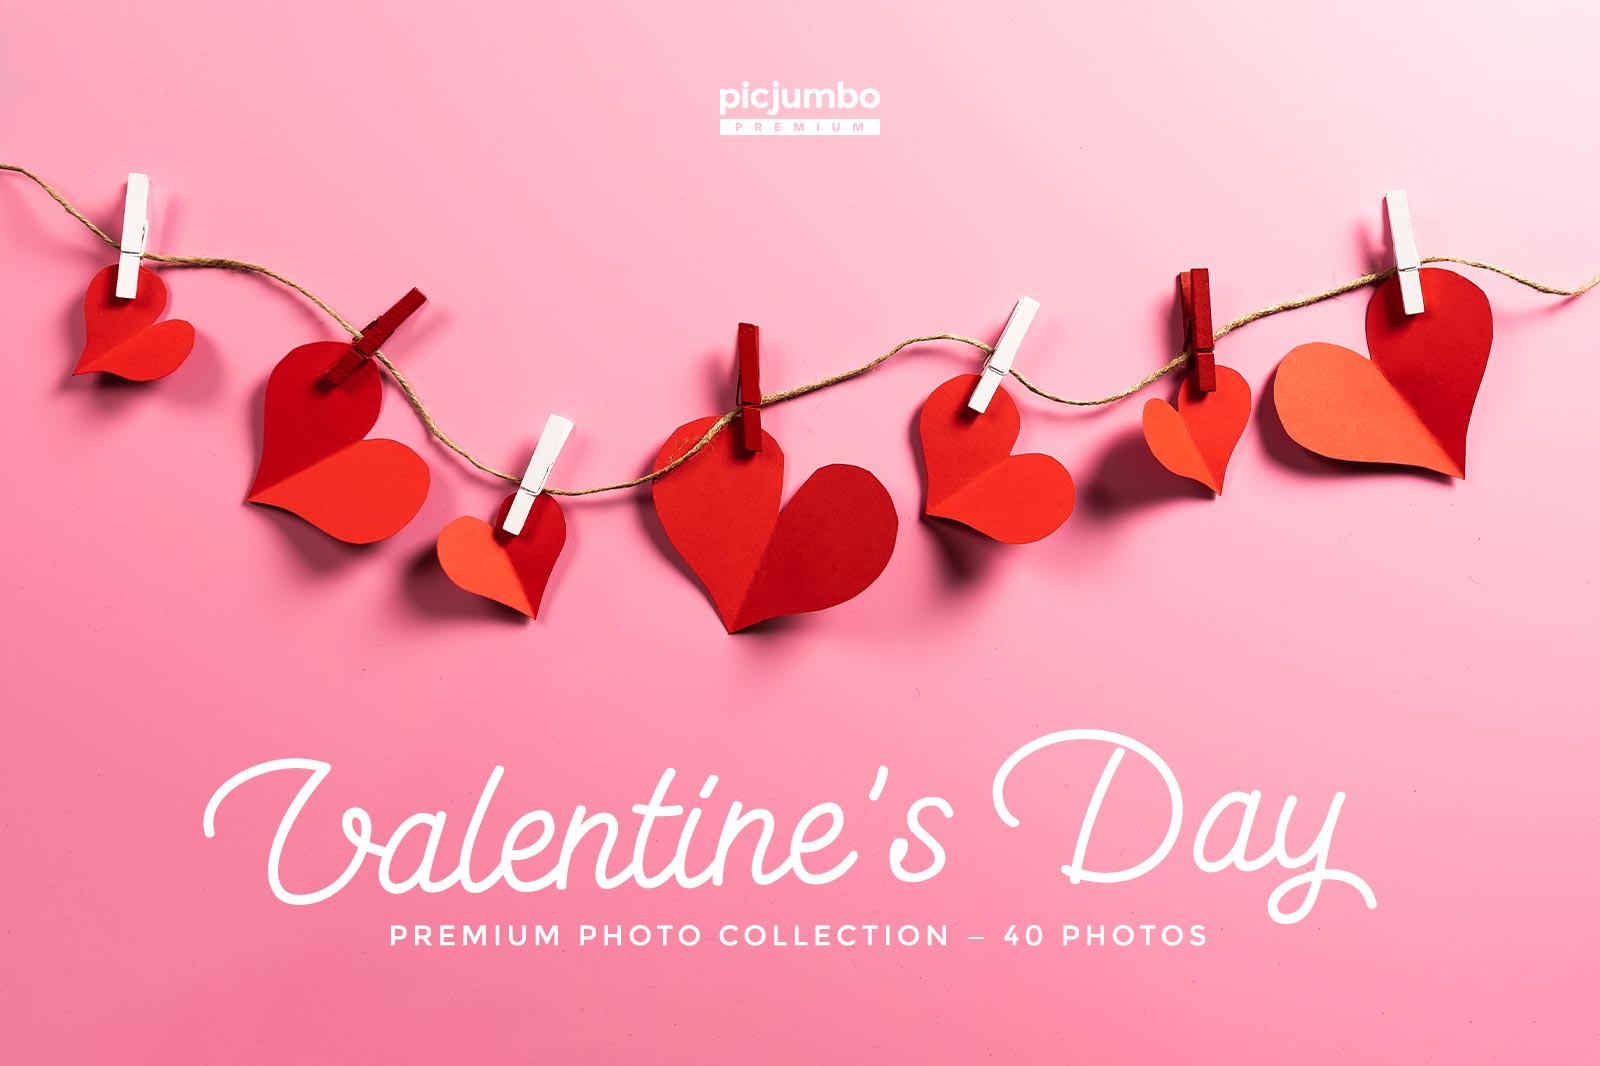 Download hi-res stock photos from our Valentine’s Day Vol. 3 PREMIUM Collection!